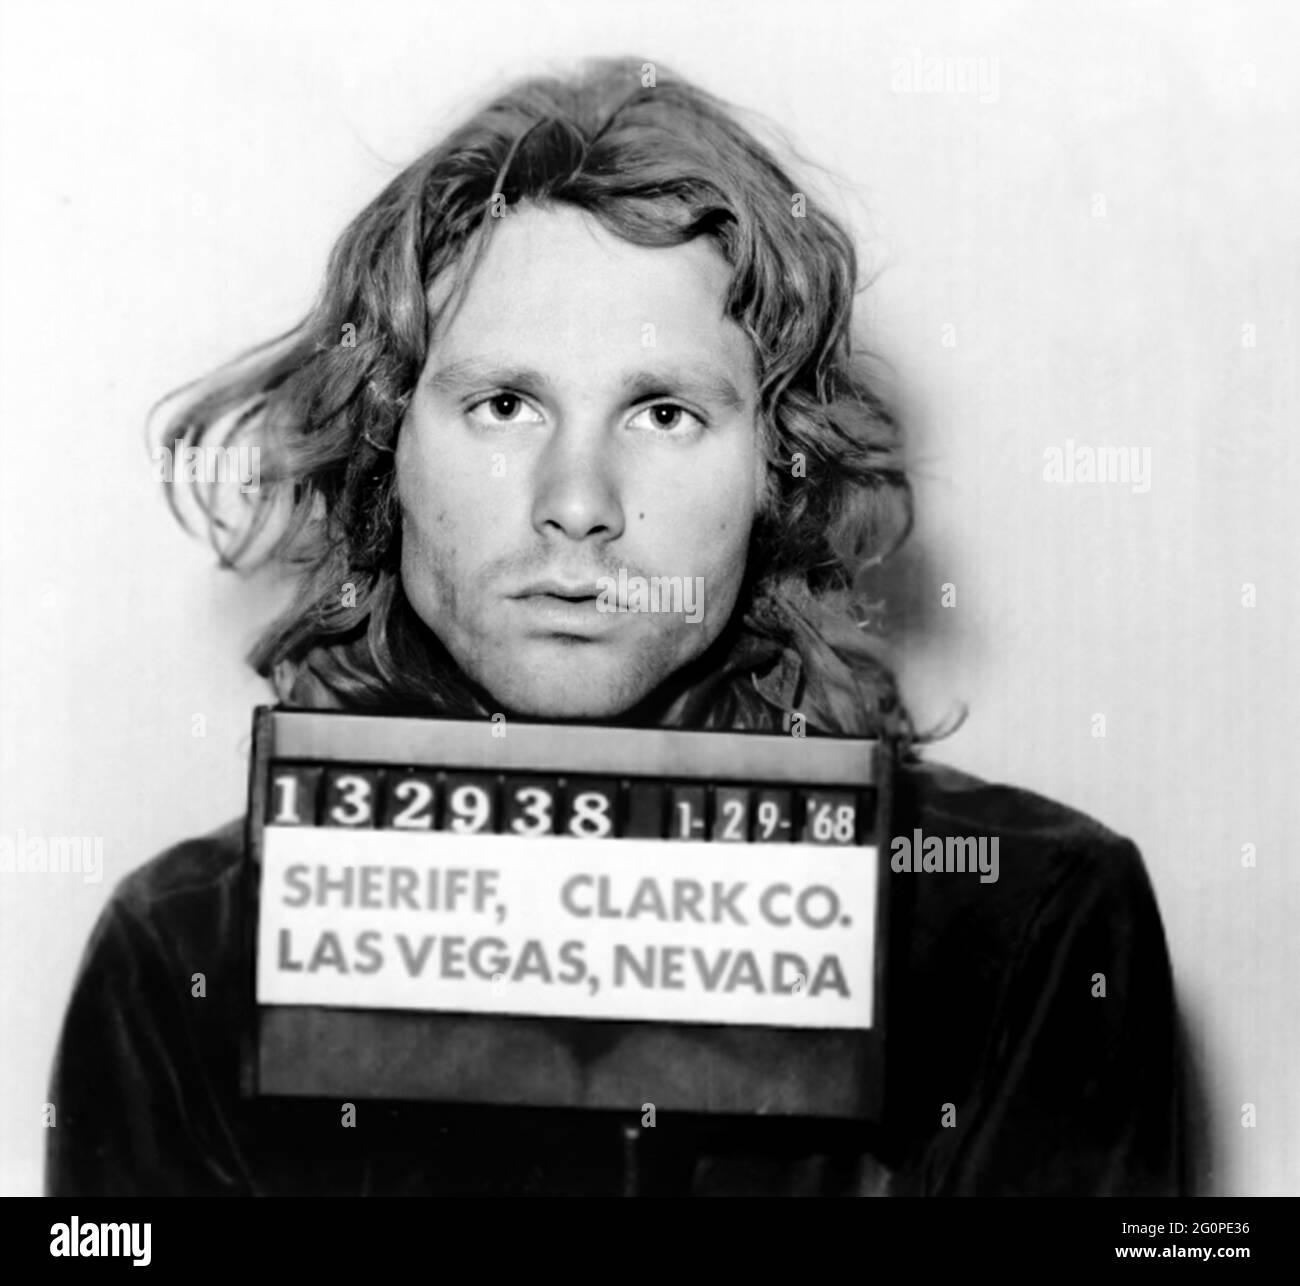 1968, 29 january, Clark County , Las Vegas , USA : The celebrated Rockstar singer and composer JIM MORRISON ( 1943 - 1971 ) of THE DOORS ( founded in 1965 ) when was arrested by Police Department in the official mug-shot . Jim had been charged arrested outside the Pussycat-A-Go-Go in Las Vegas for being drunk in public while visiting the city with author Robert Gover , who is also arrested . Unknown photographer , Clark County , Las Vegas , Nevada . - HISTORY - FOTO STORICHE  - MUSIC - MUSICA - cantante - COMPOSITORE - ROCK STAR - ARRESTO - Arrestation - ARRESTATO DALLA POLIZIA - FOTO SEGNALET Stock Photo